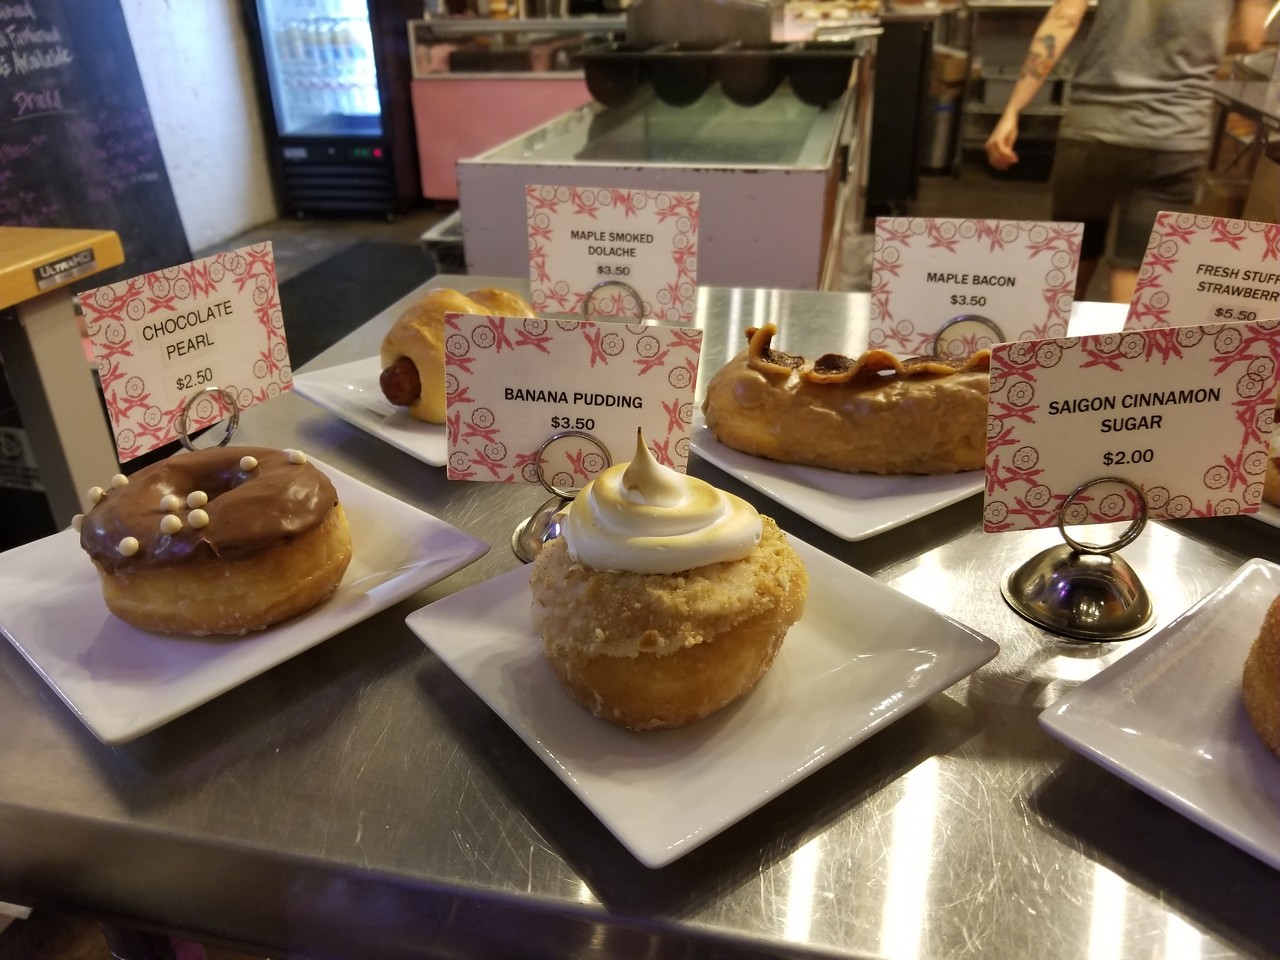 a plate of pastries with signs on it